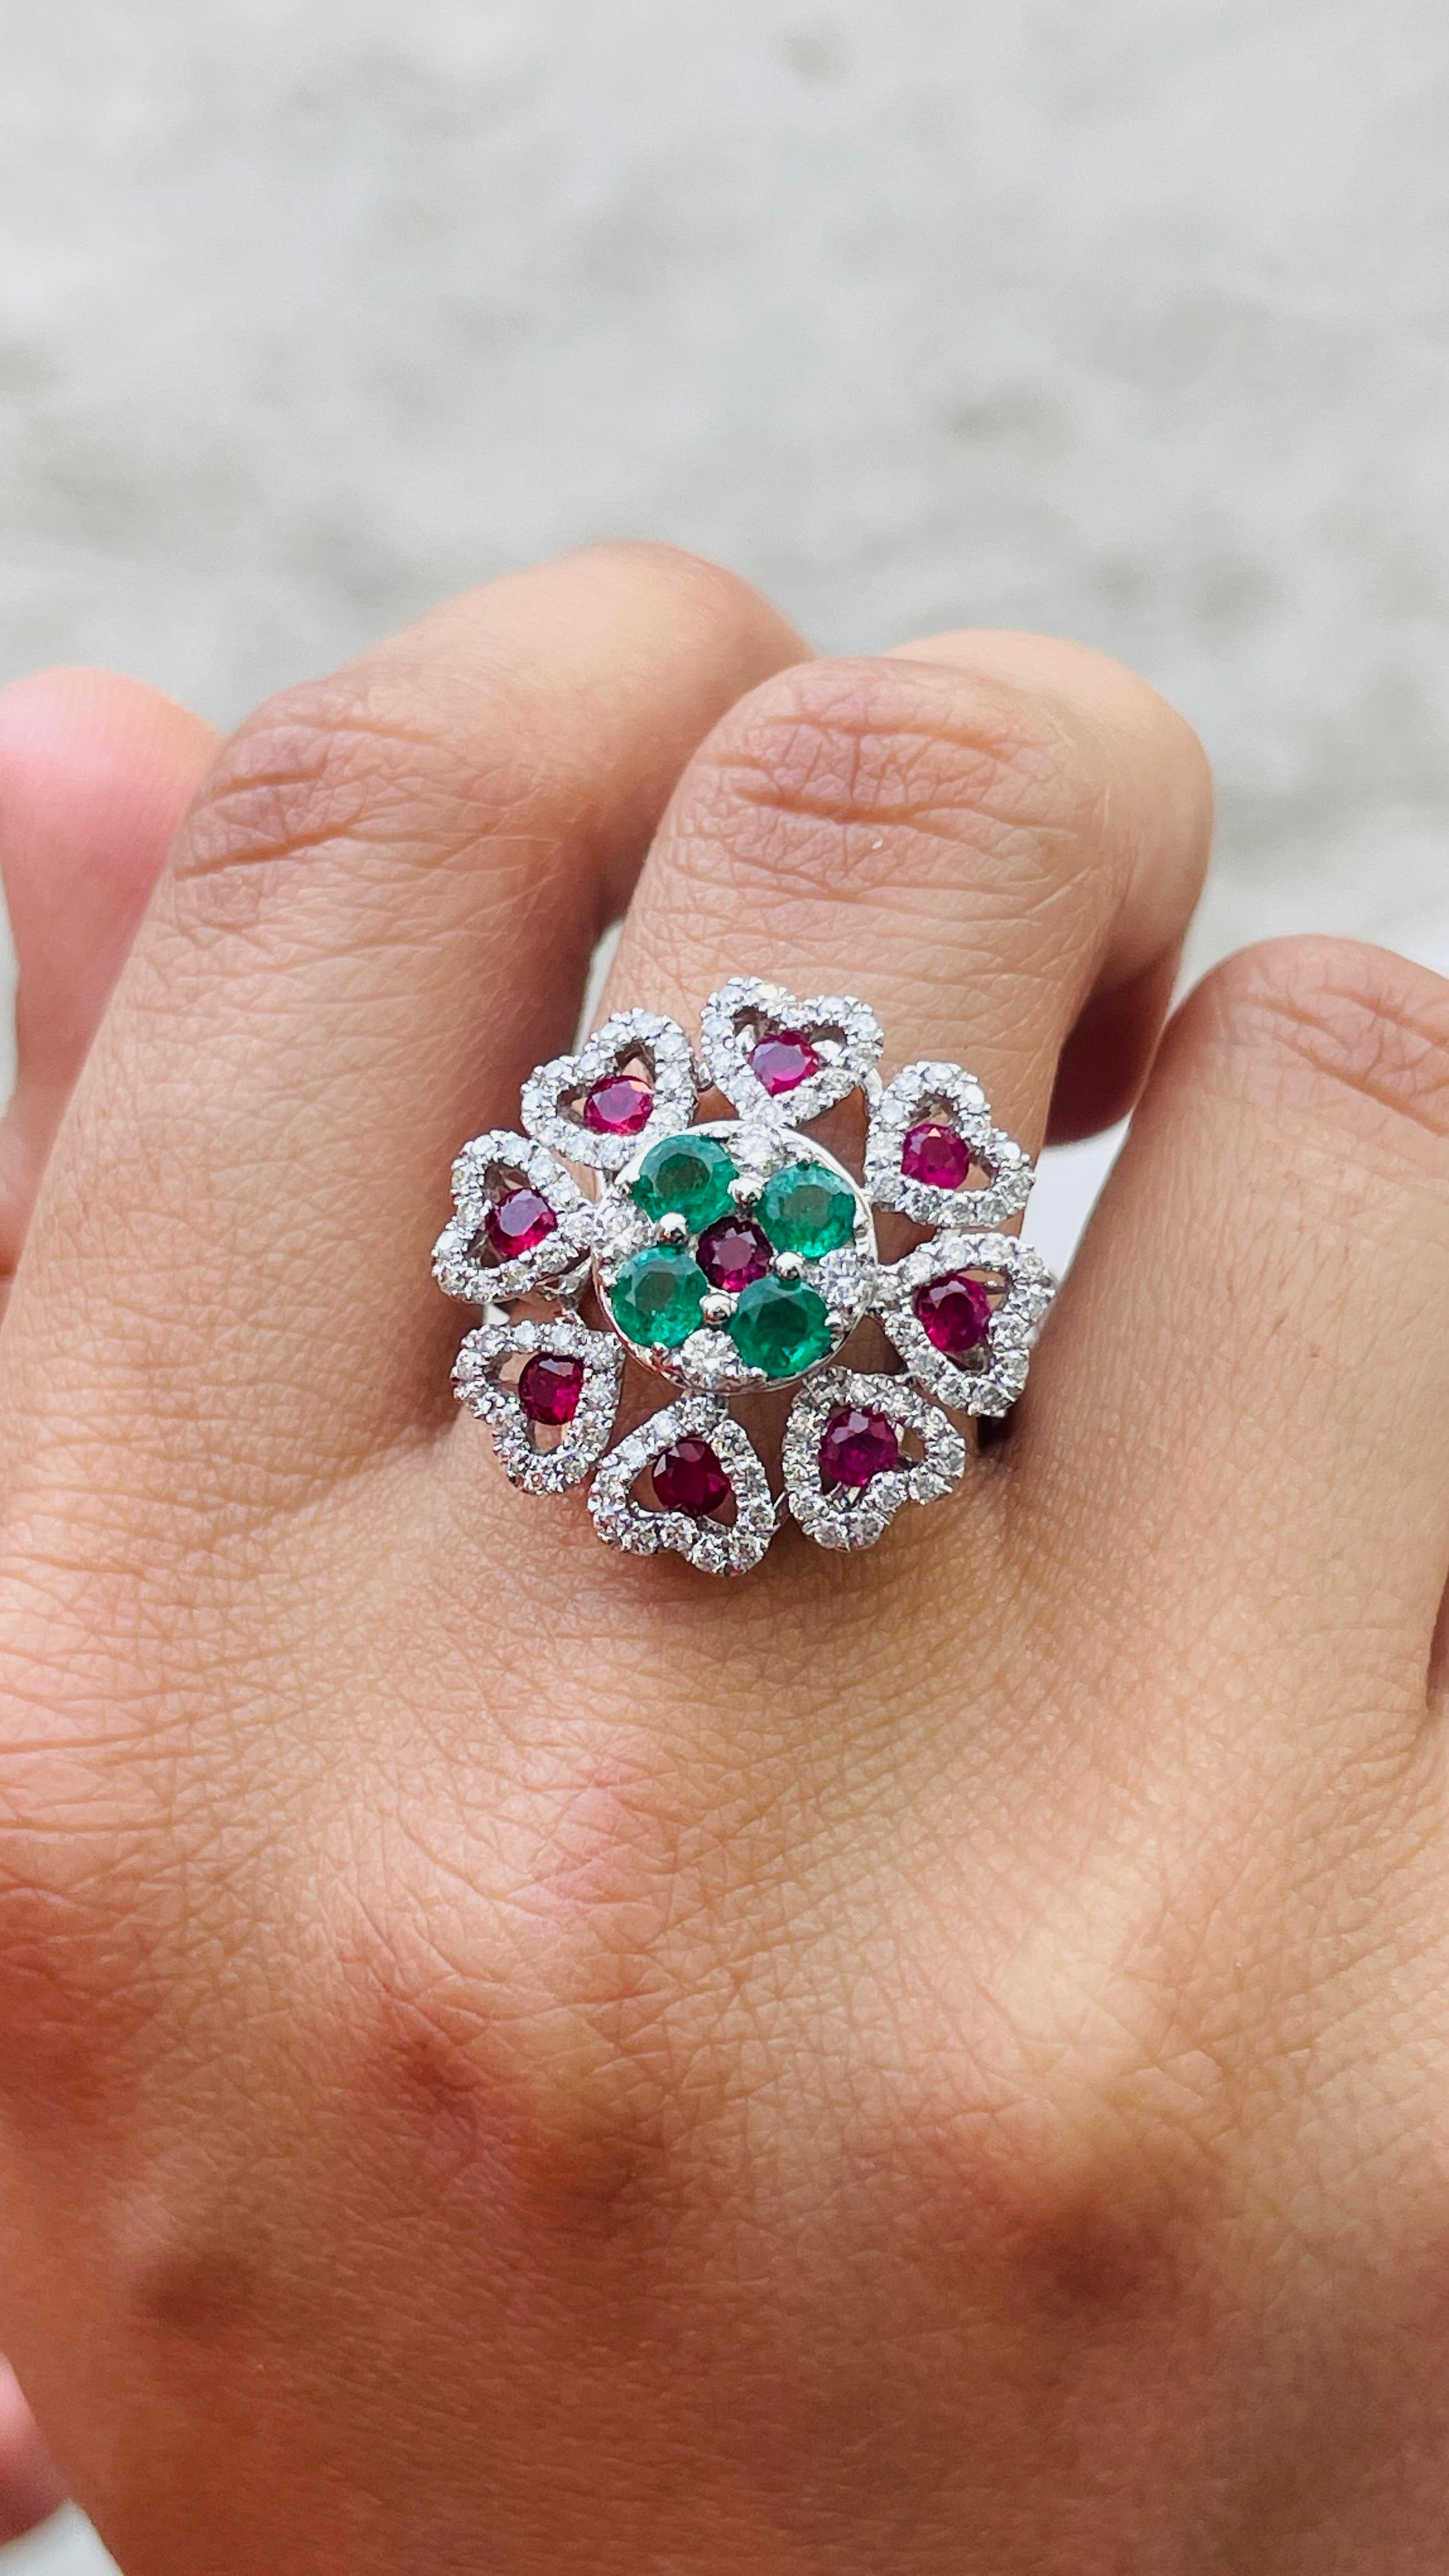 For Sale:  14K White Gold Emerald and Ruby Floral Cocktail Ring with Diamonds 4